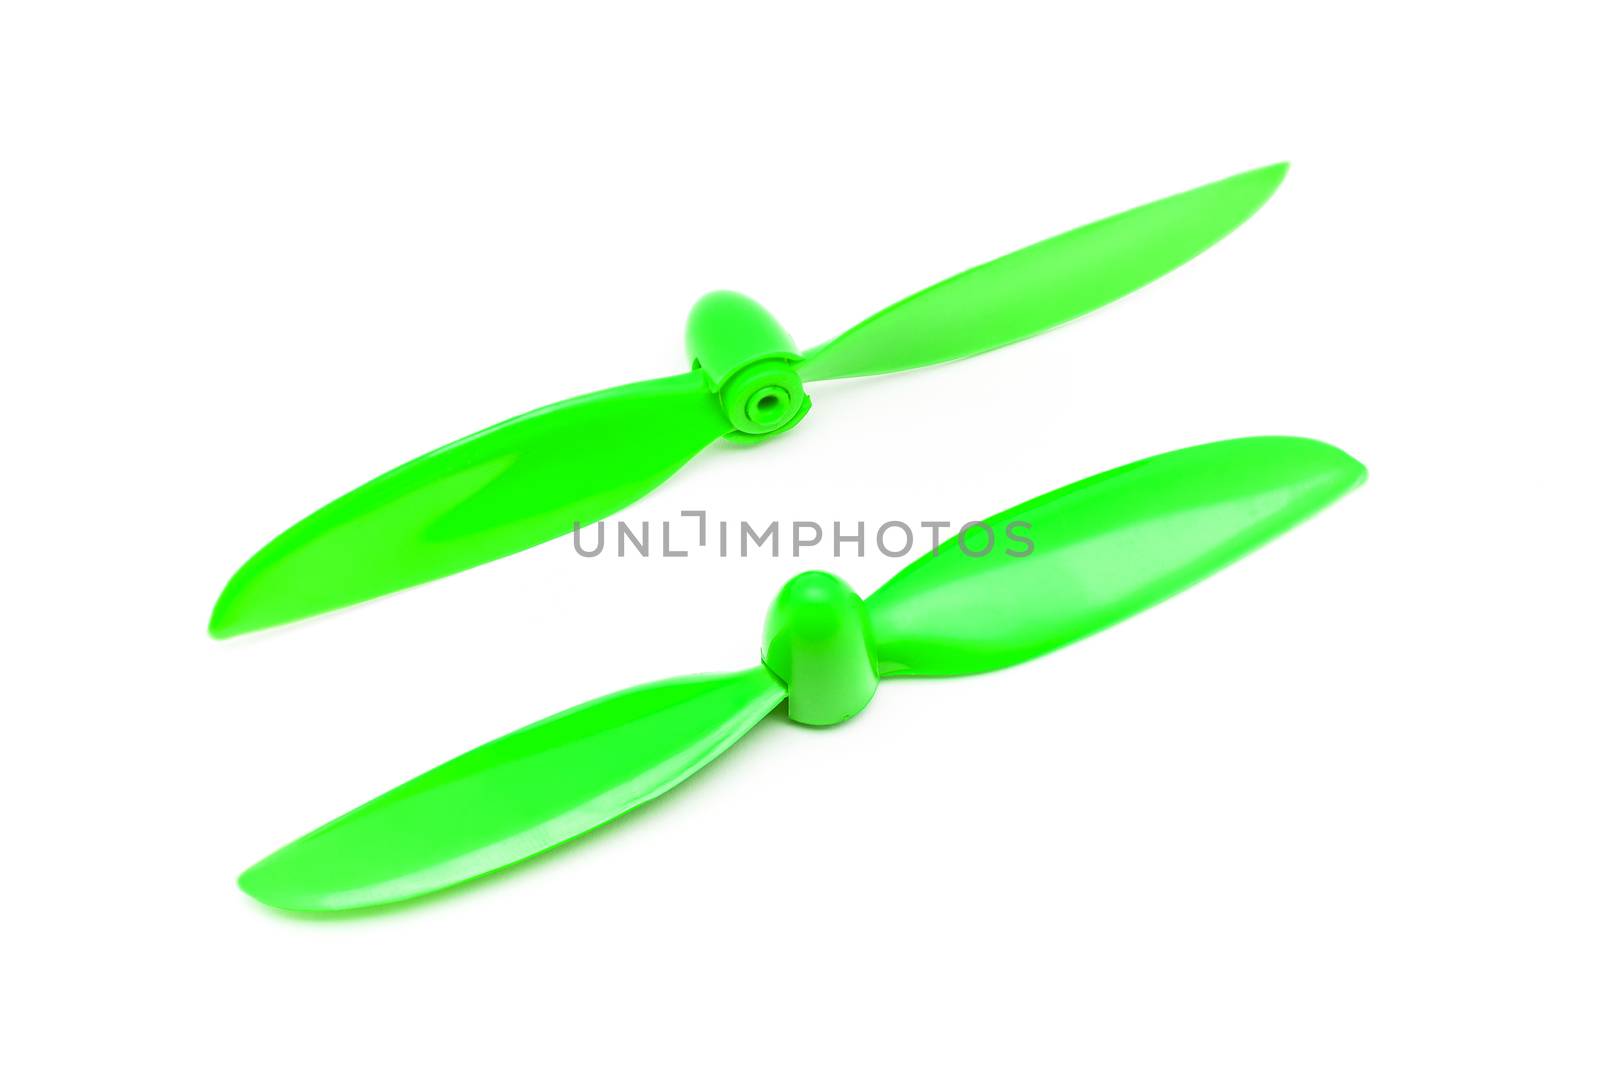 Pair of Green Propellers for Radio Controlled Model Aircraft.